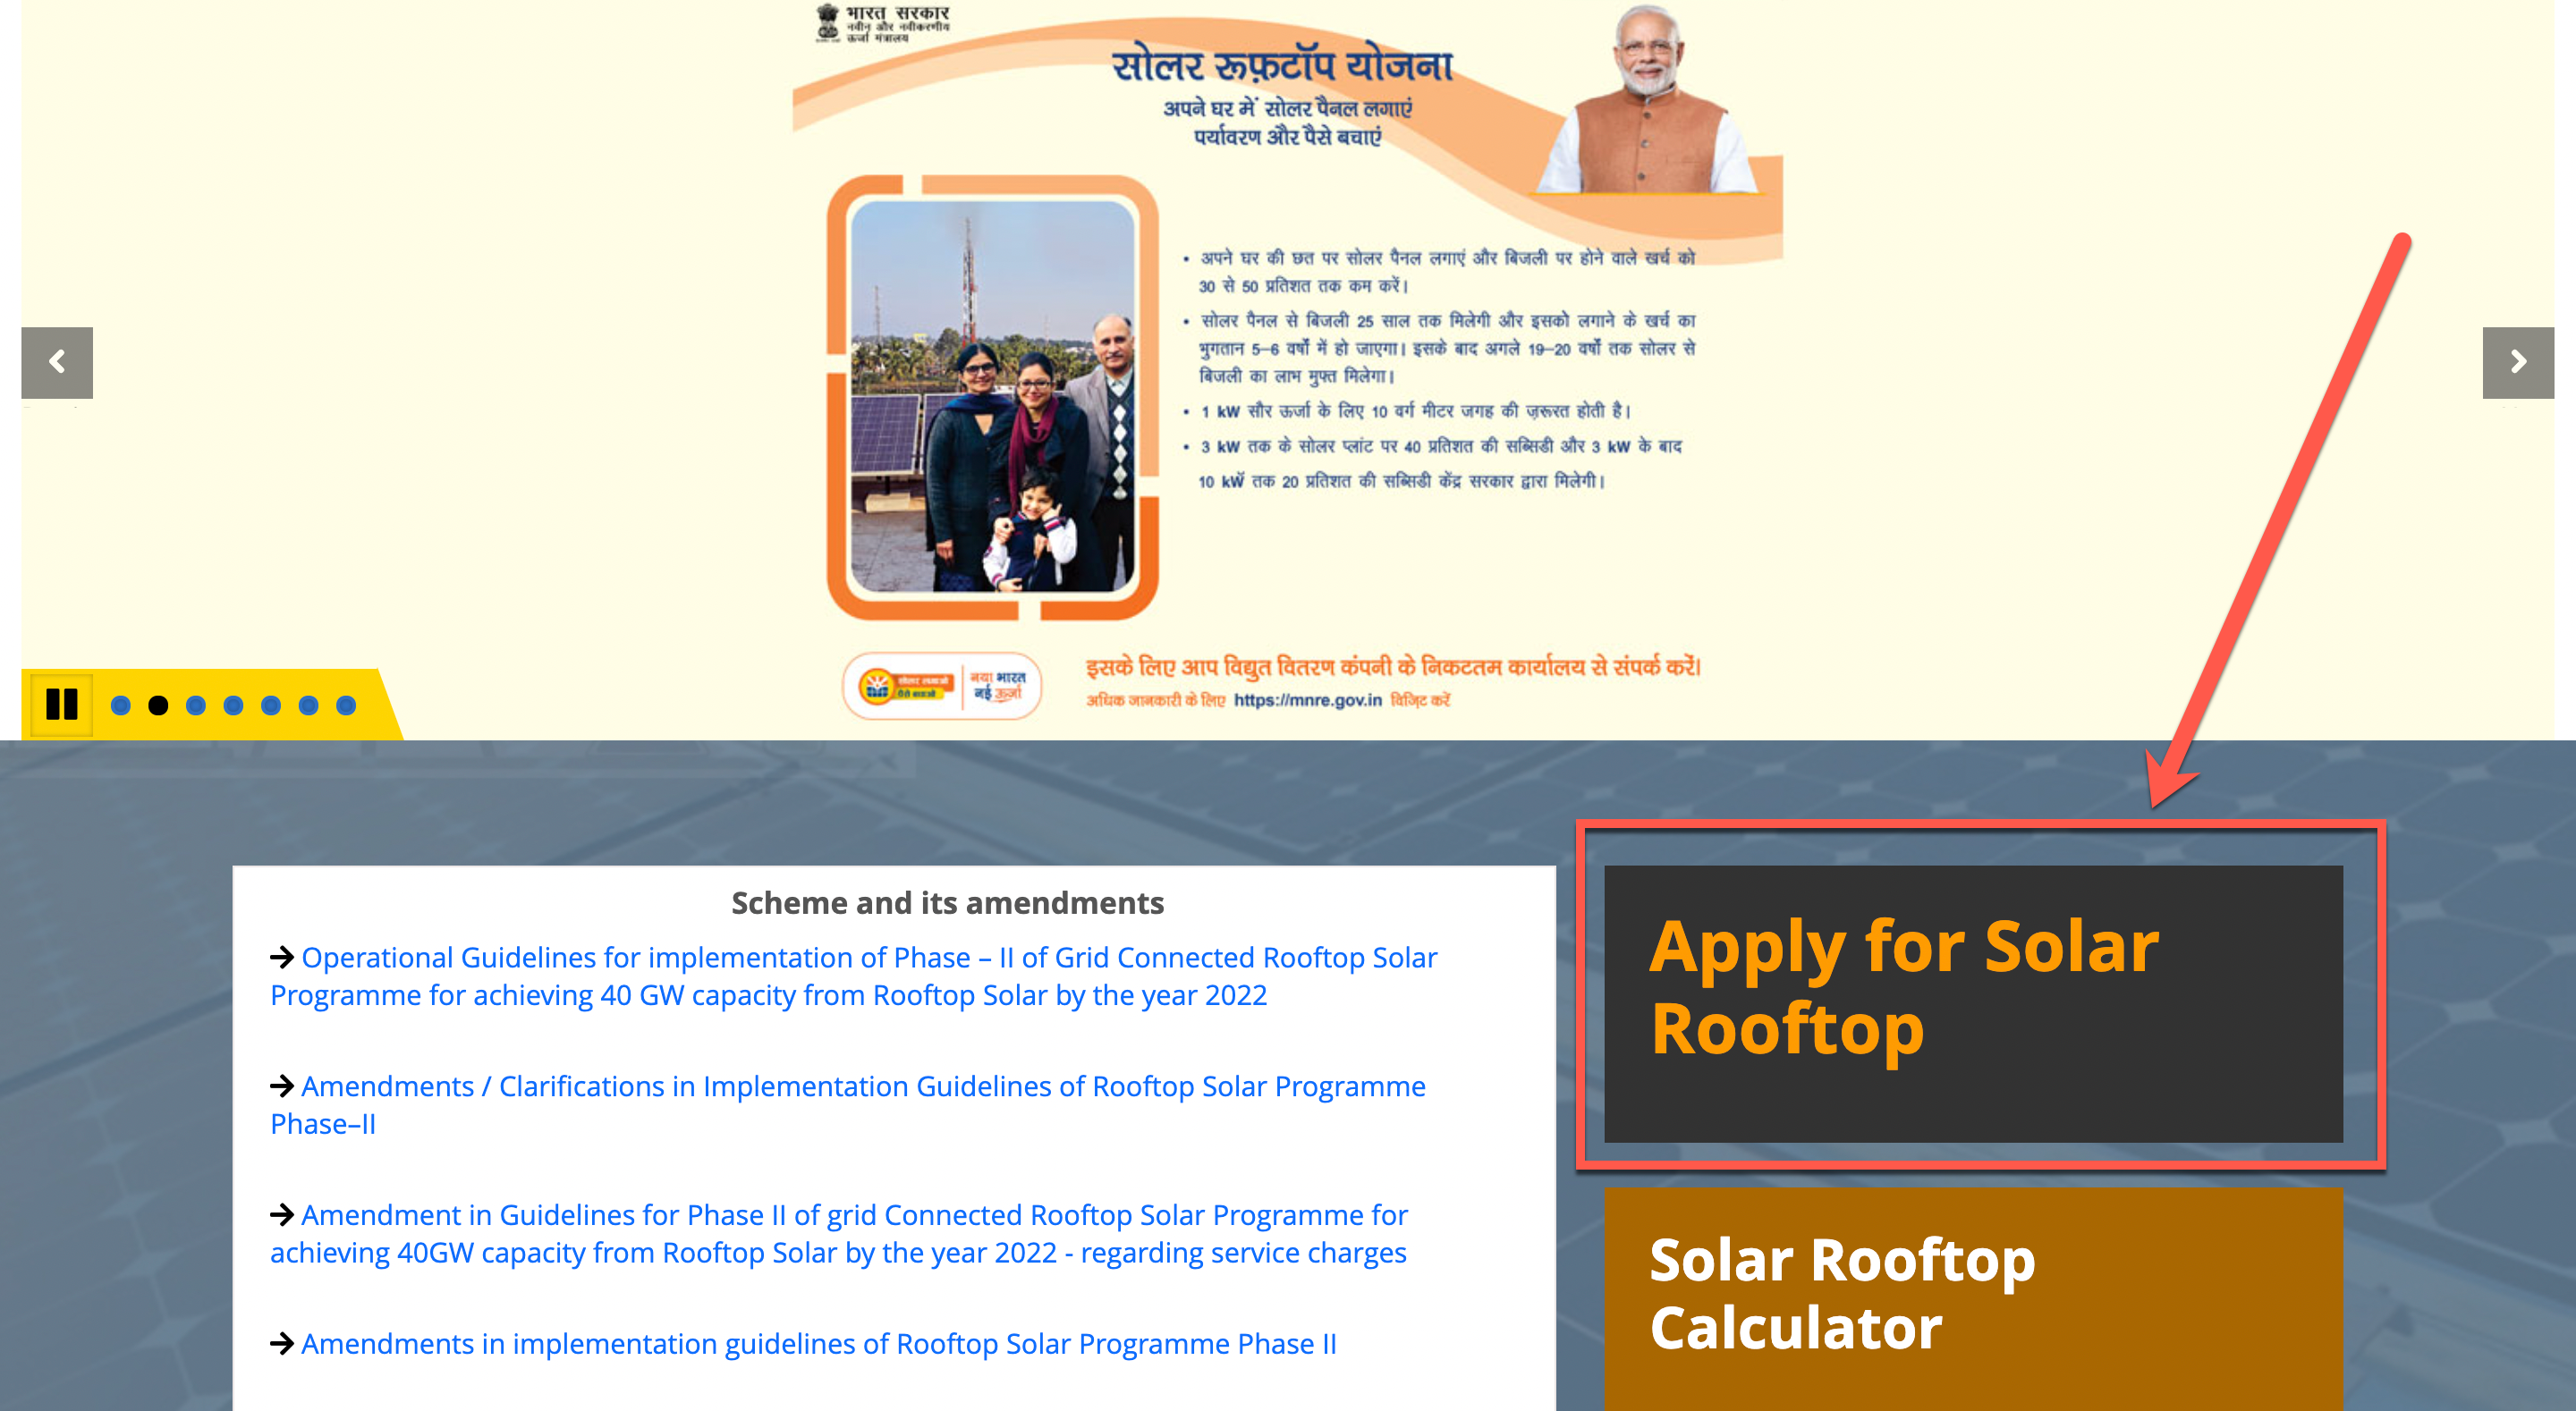 Click on the "Apply For Solar Rooftop" button